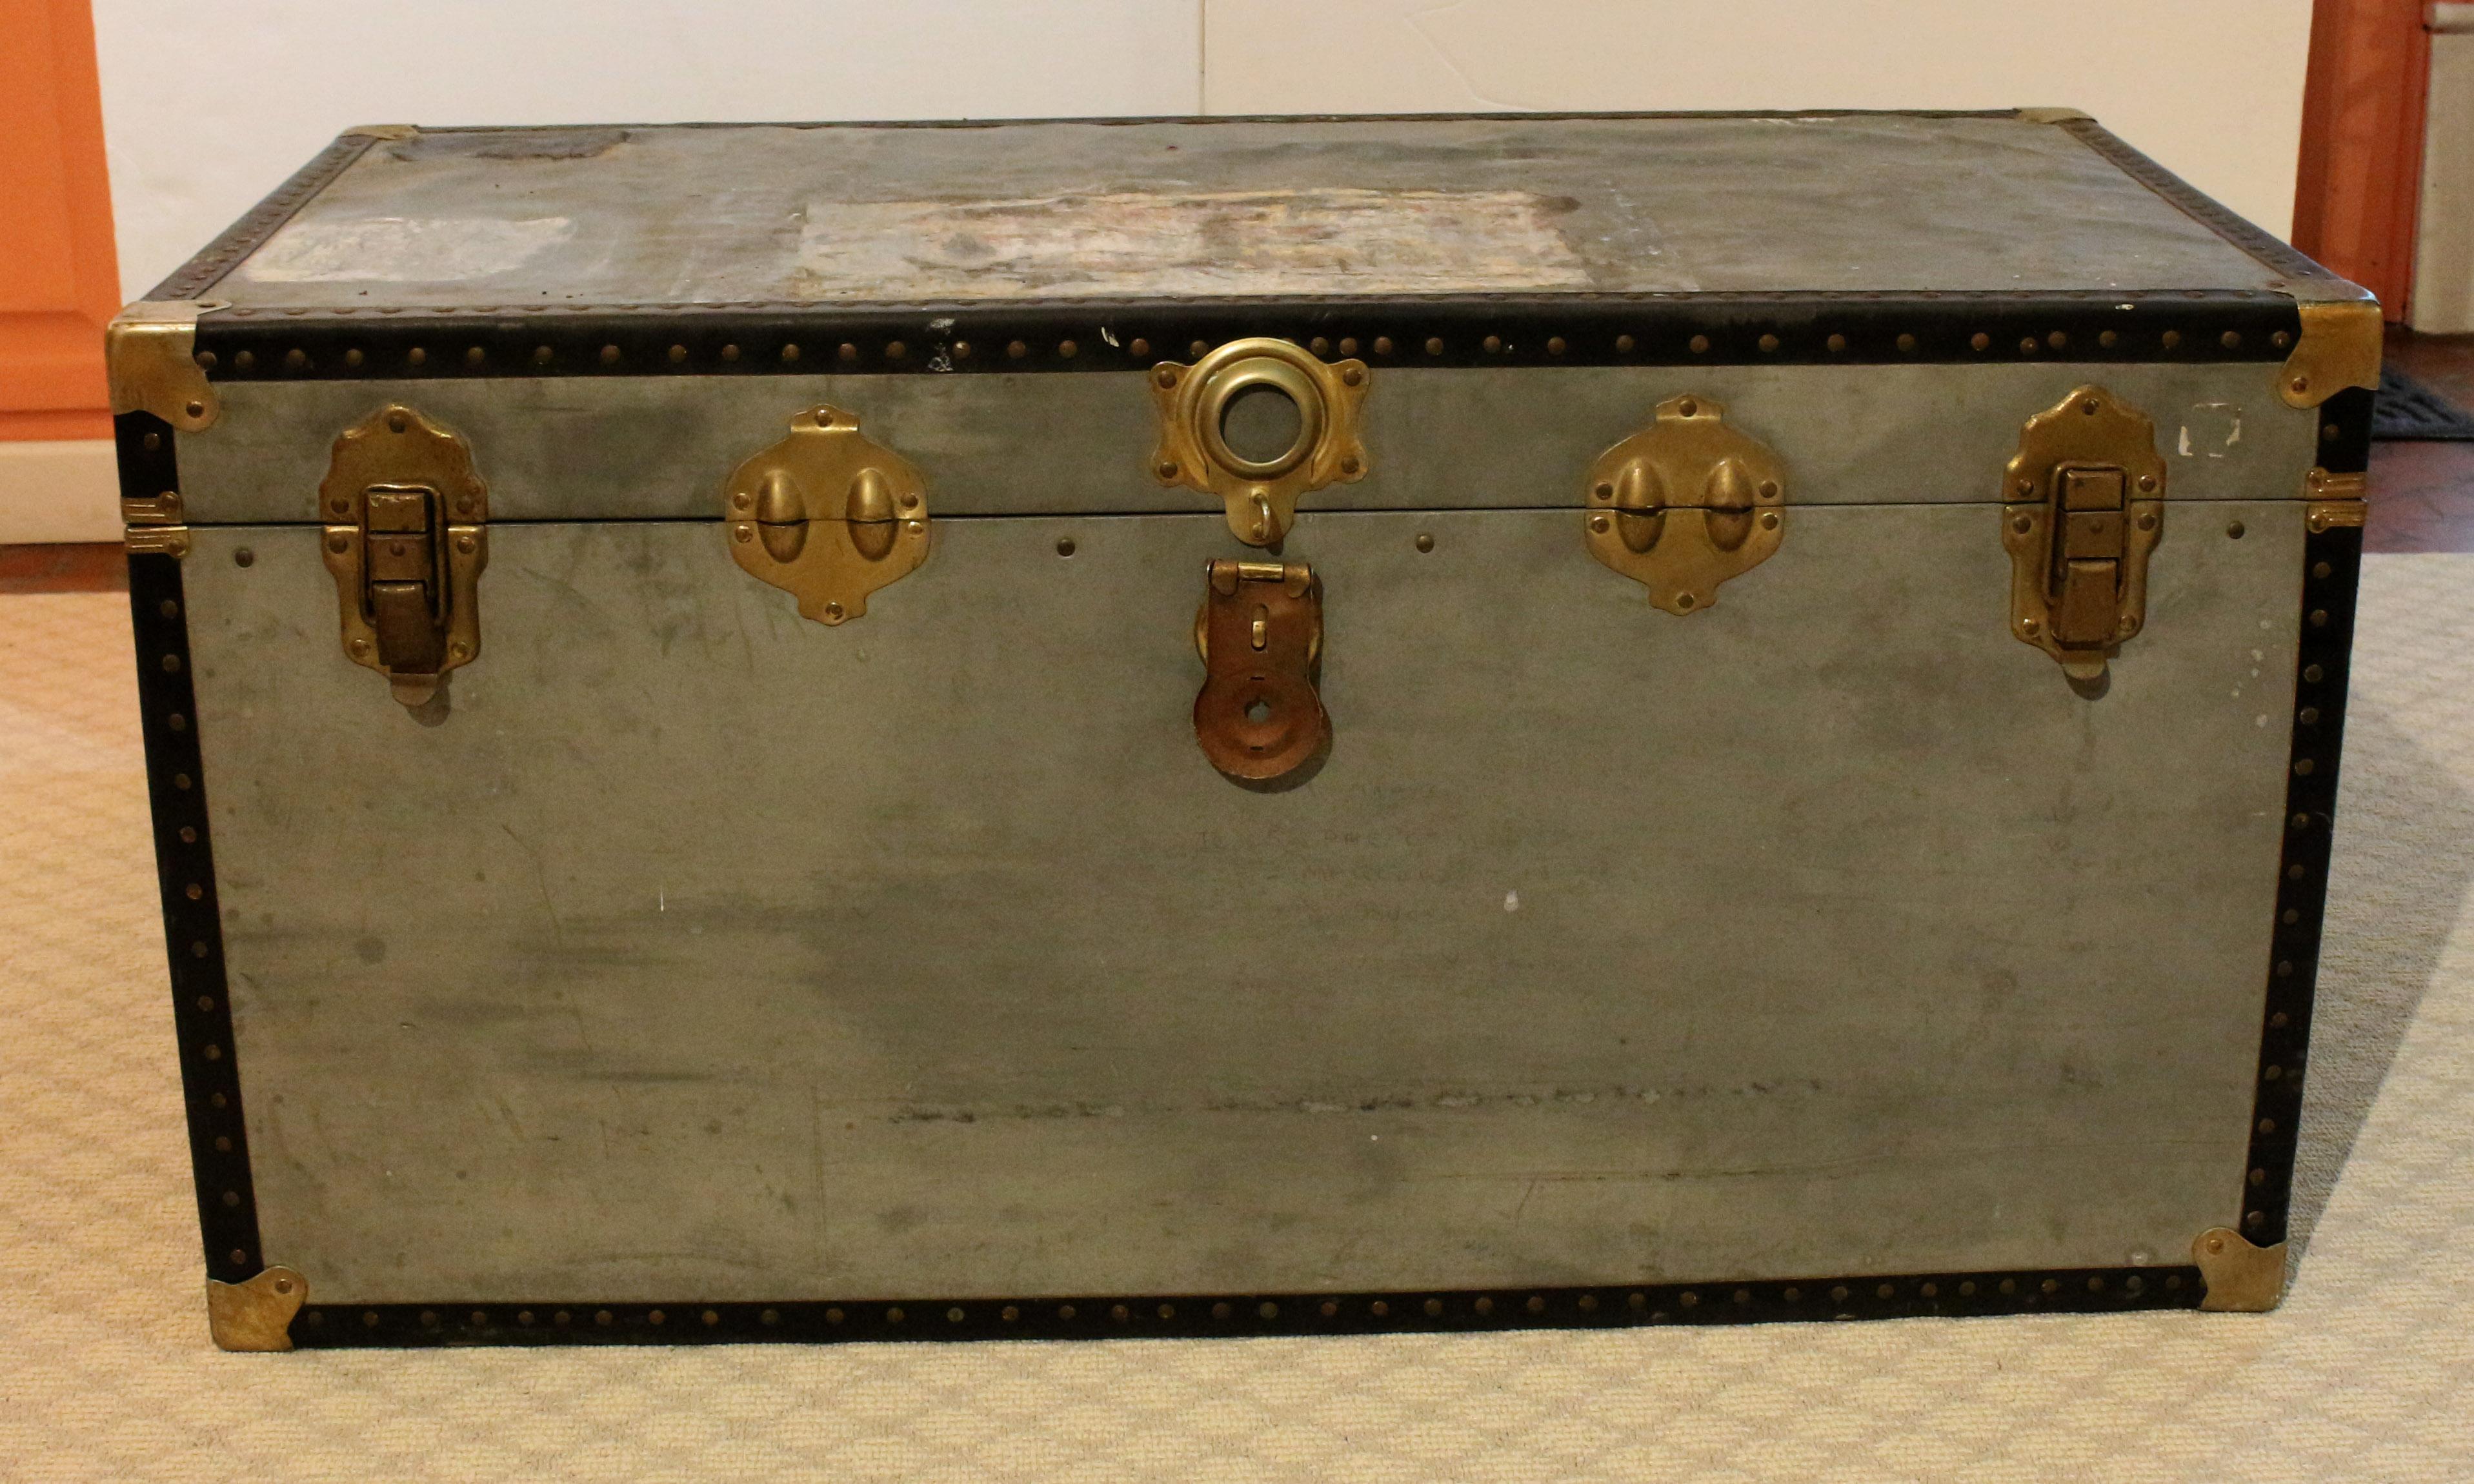 A zinc clad traveling trunk, Mid-20th Century. Wide black metal bindings, brass plated studs & fittings. One handle as is. Top as is. Measures: 39 3/4